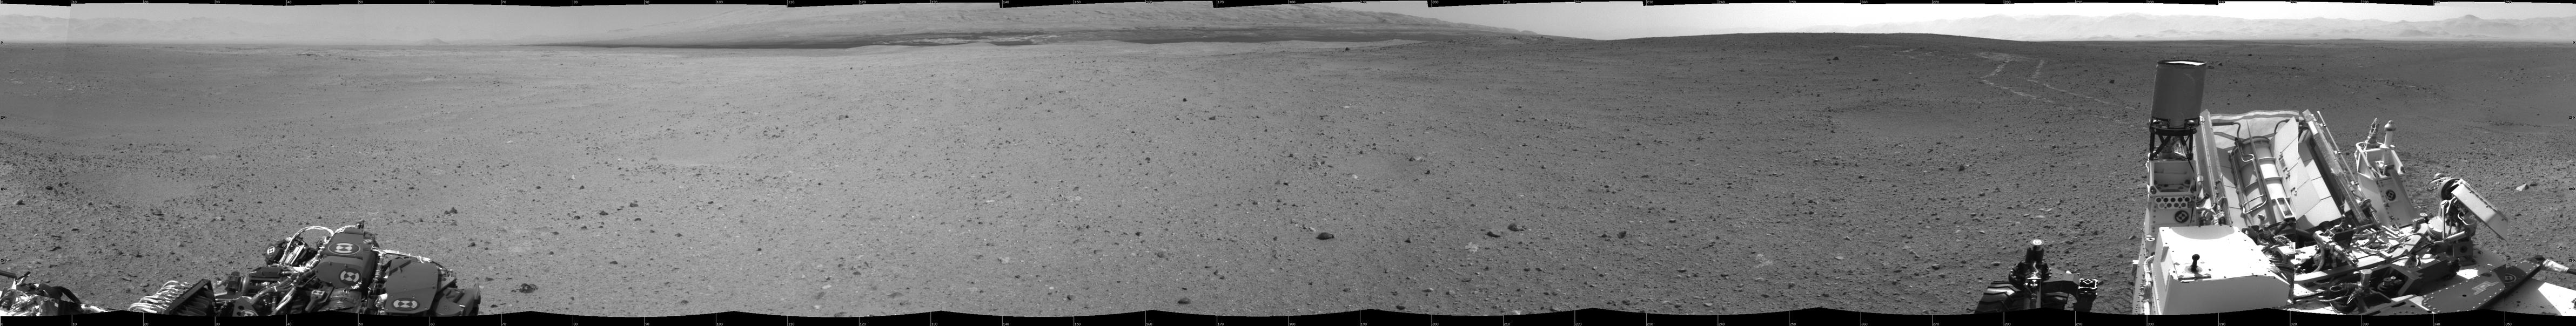 Looking Back at Tracks from Sol 24 Drive